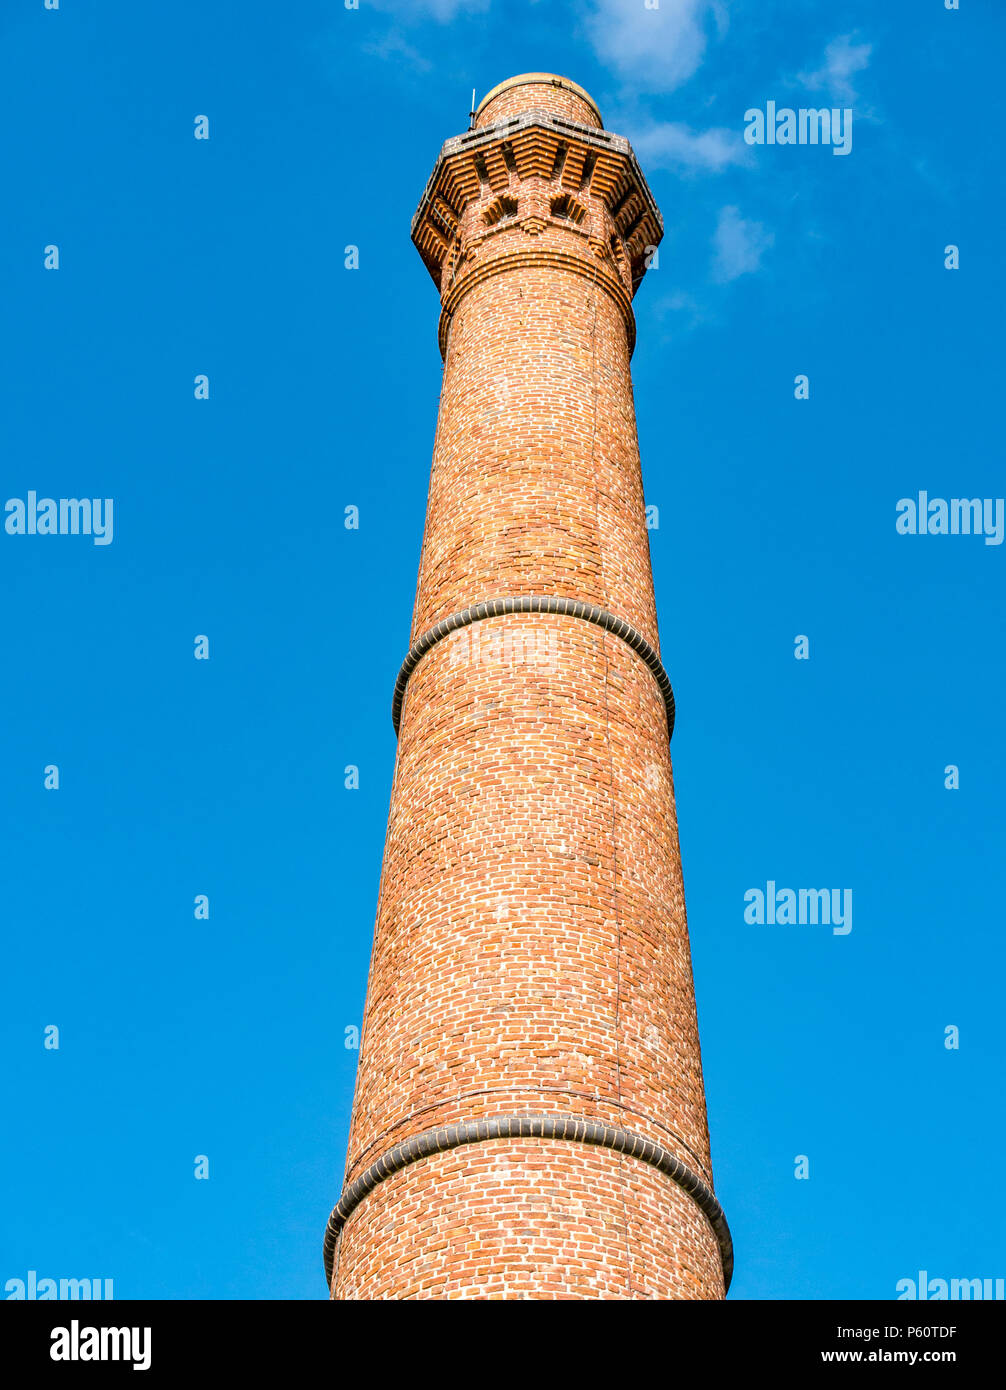 Tall round red brick Victorian industrial tower against blue sky, Canning graving dock and Albert Dock, Liverpool, England, UK Stock Photo